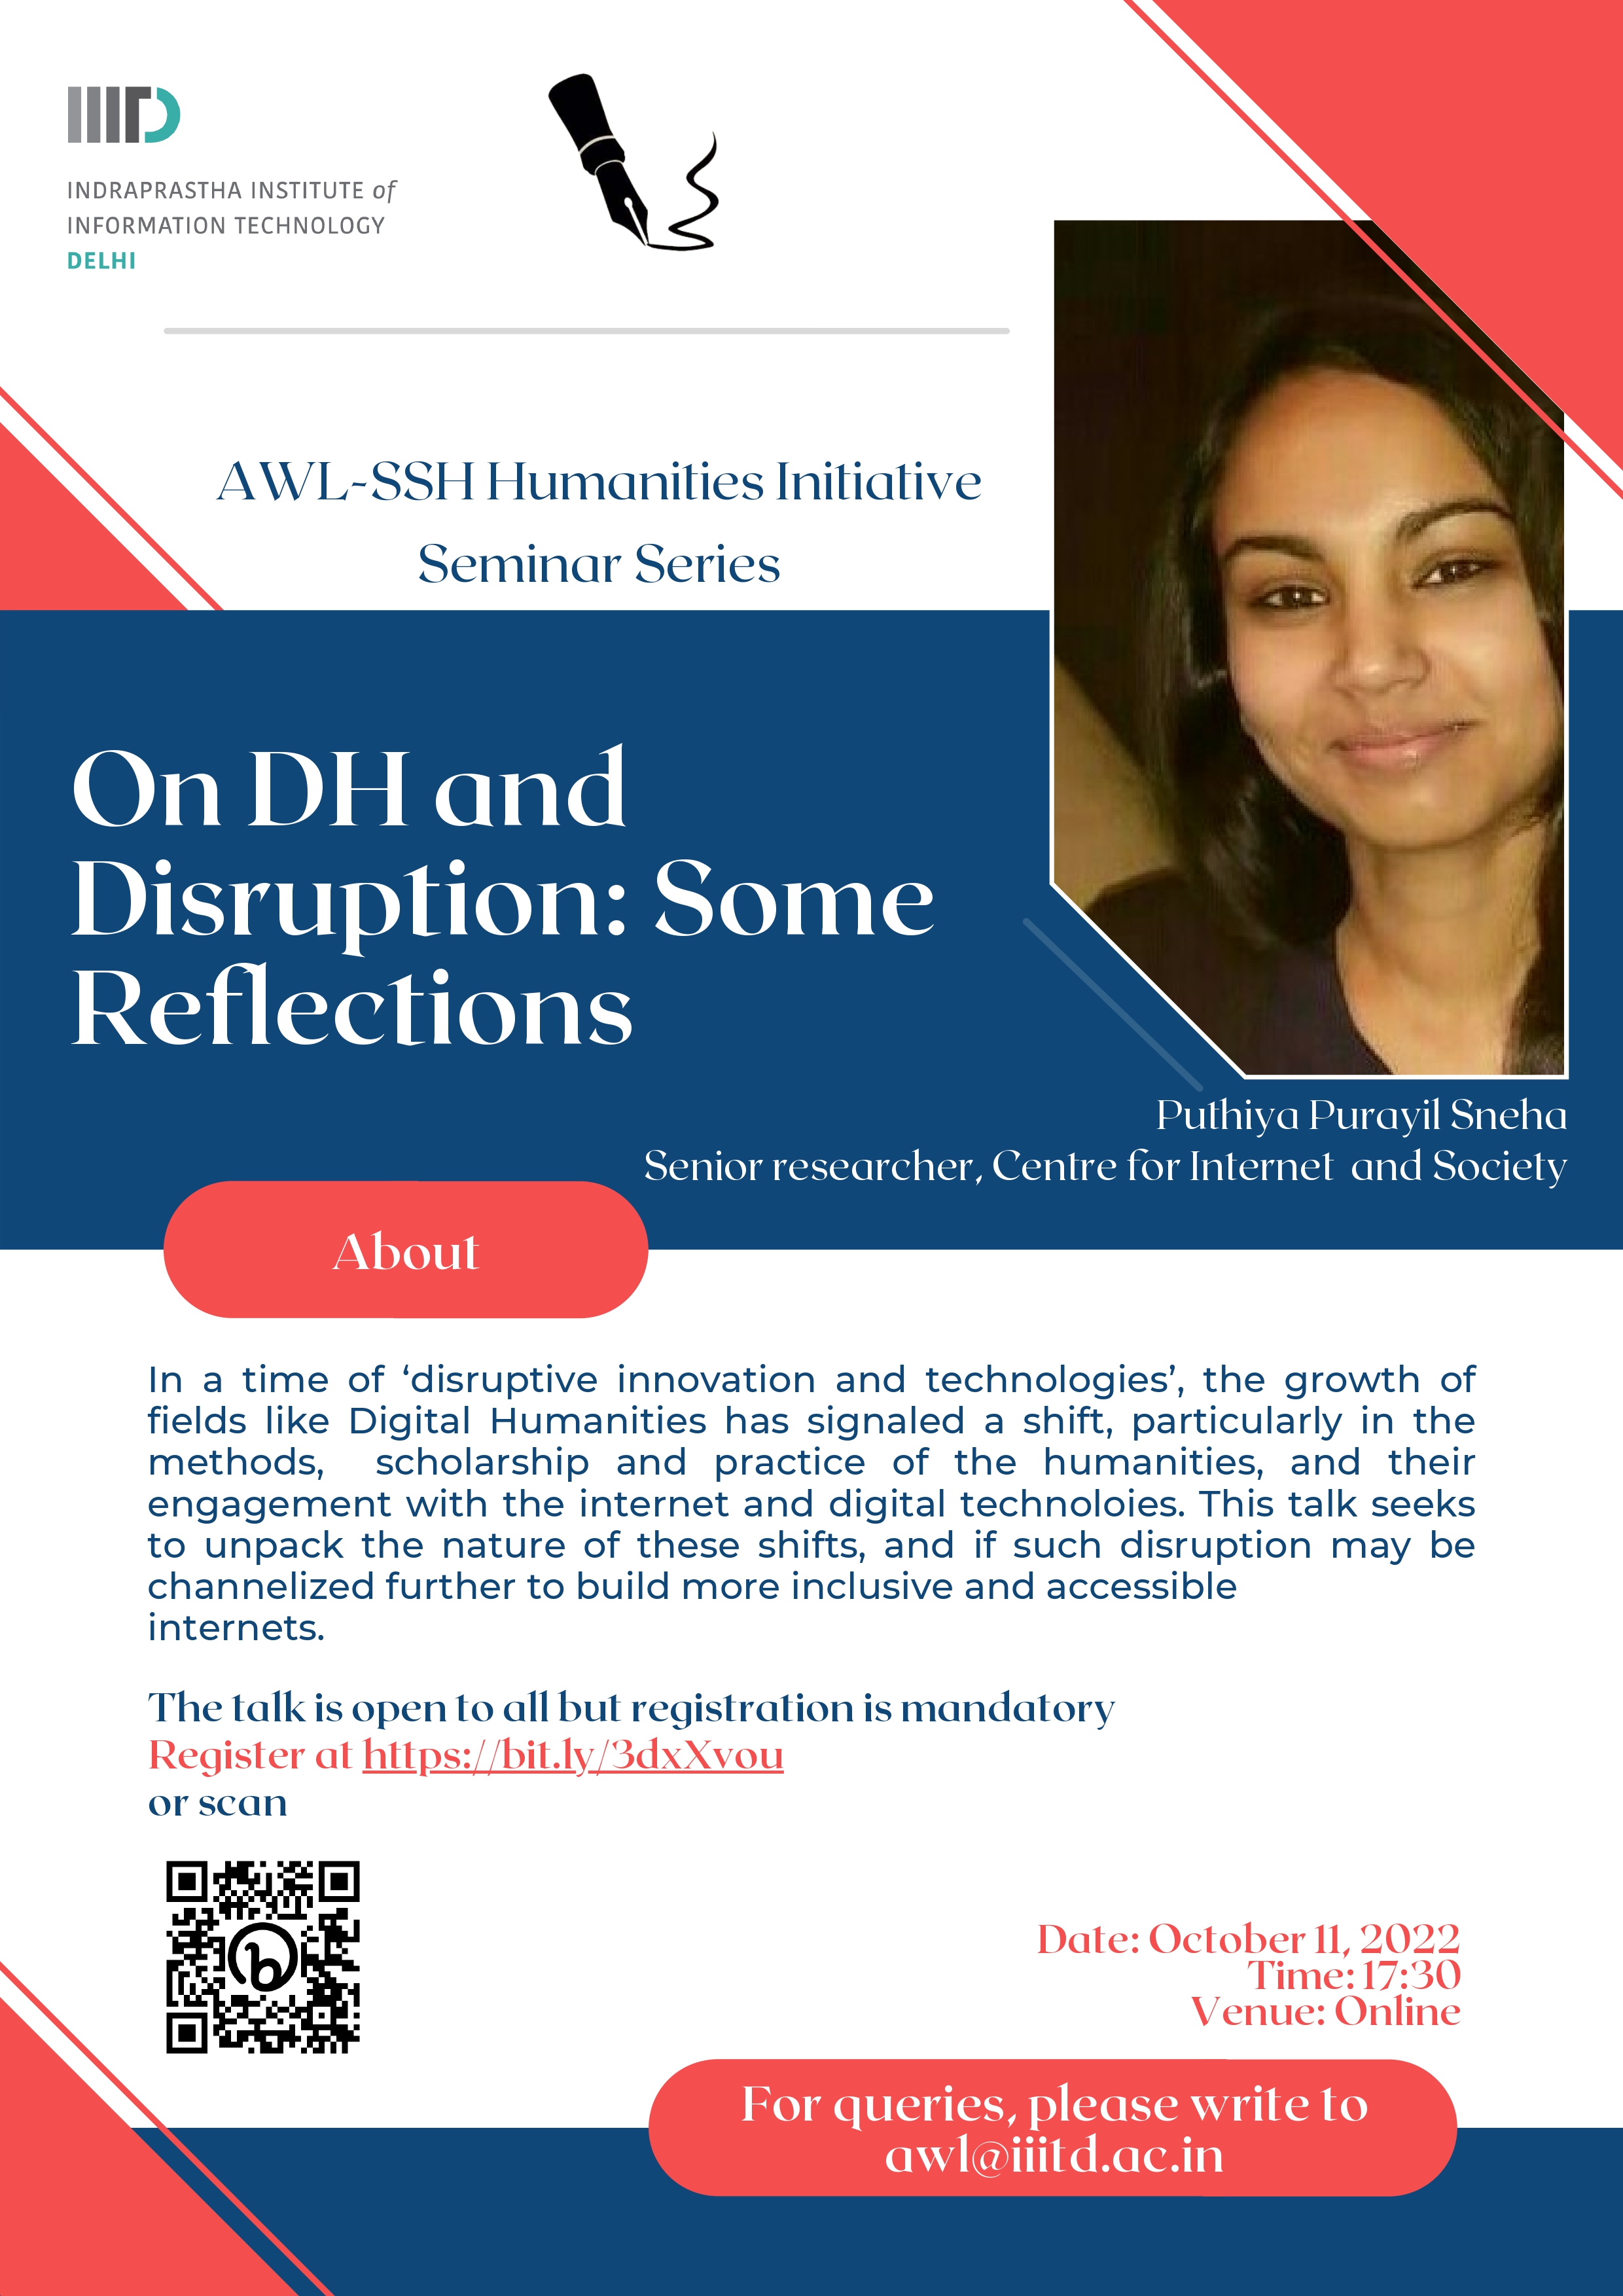 DH and Disruption: Some Reflections